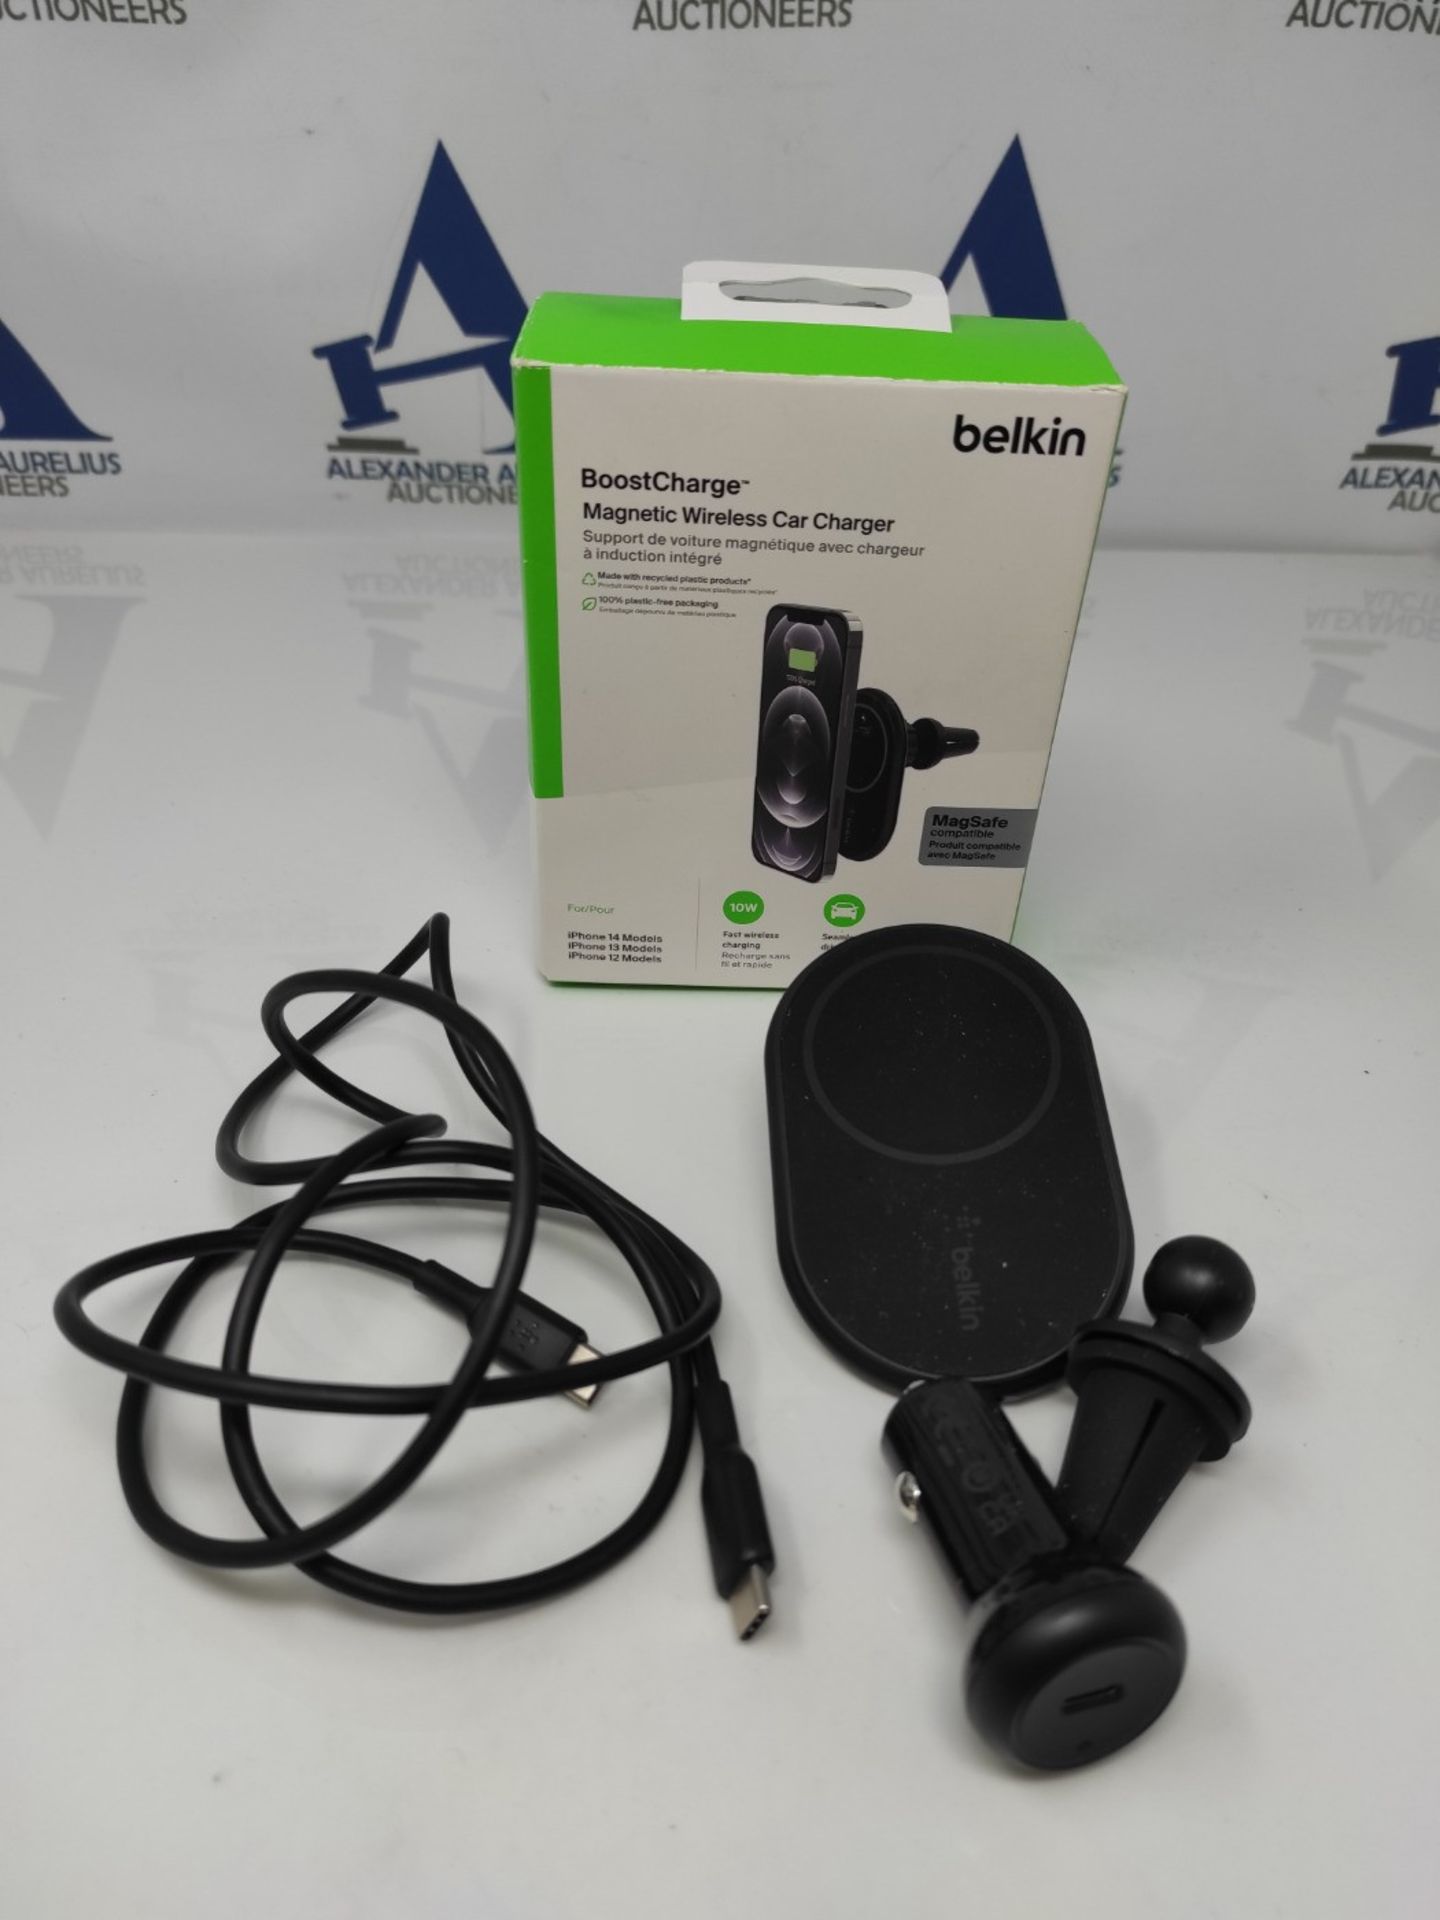 Belkin BoostCharge Wireless Charger, Magnetic Car Charger, Phone Mount Holder Compatib - Image 2 of 2